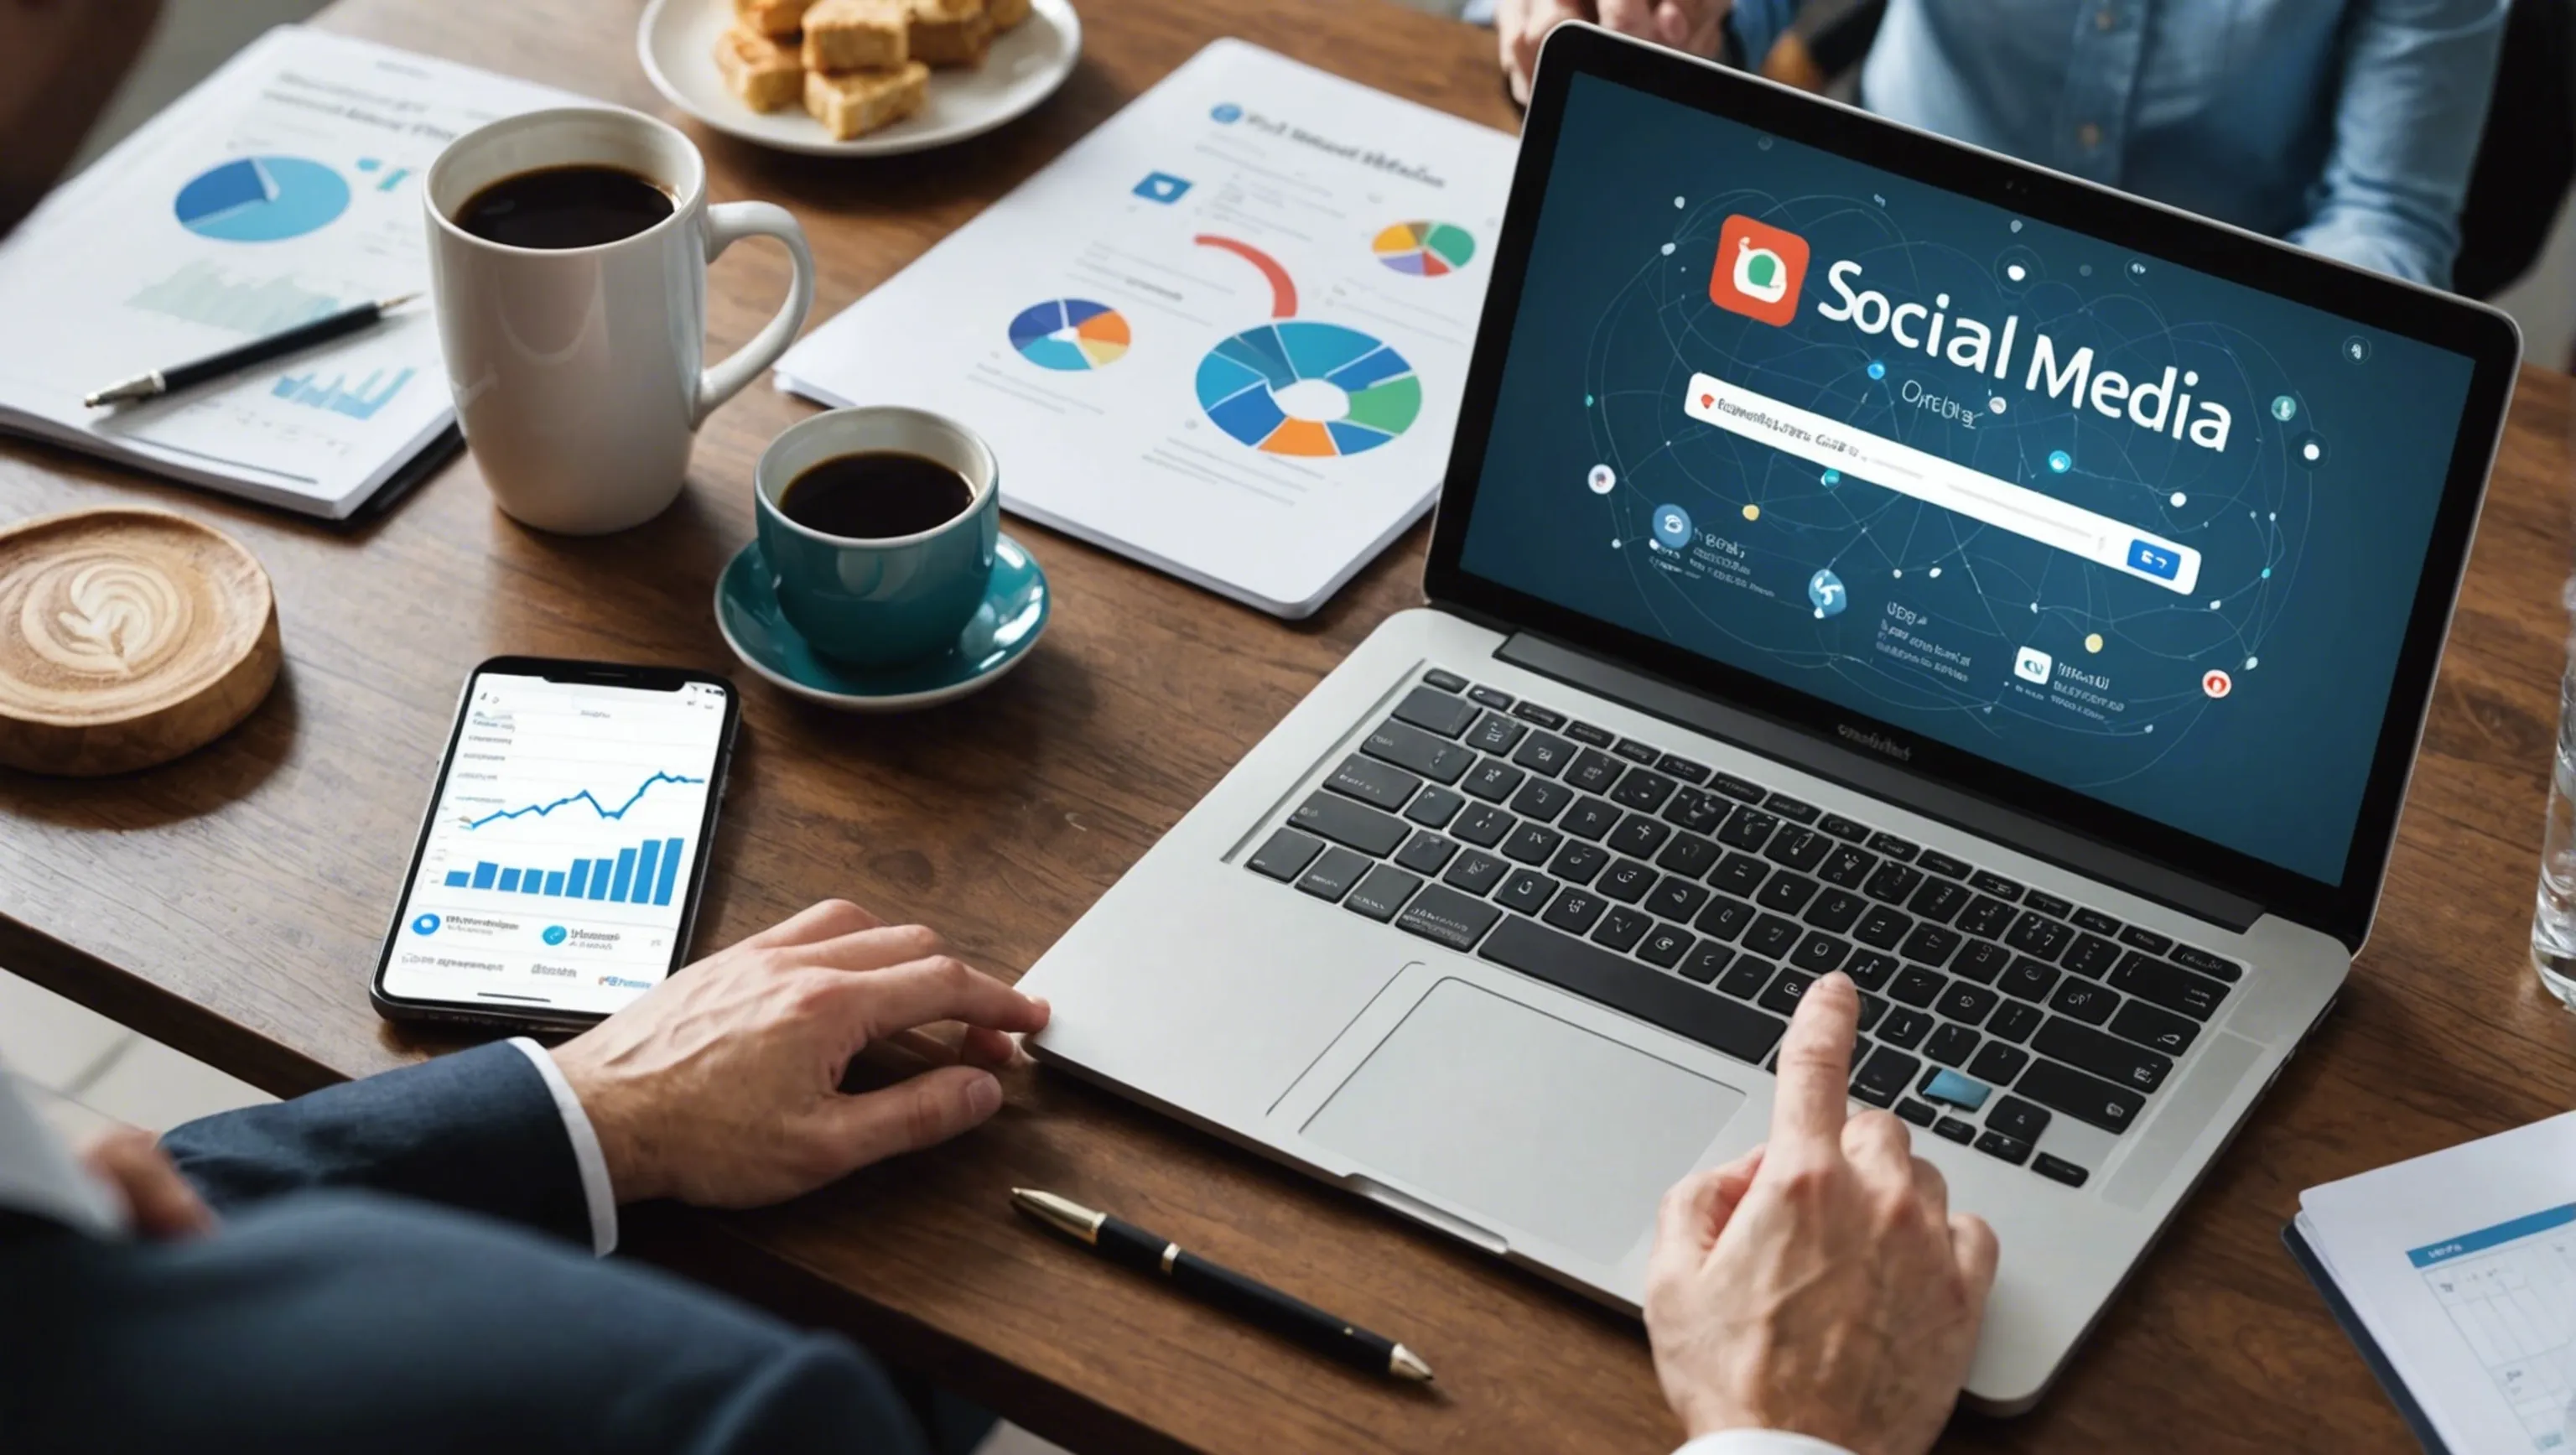 Social media analytics and tracking for marketing professionals